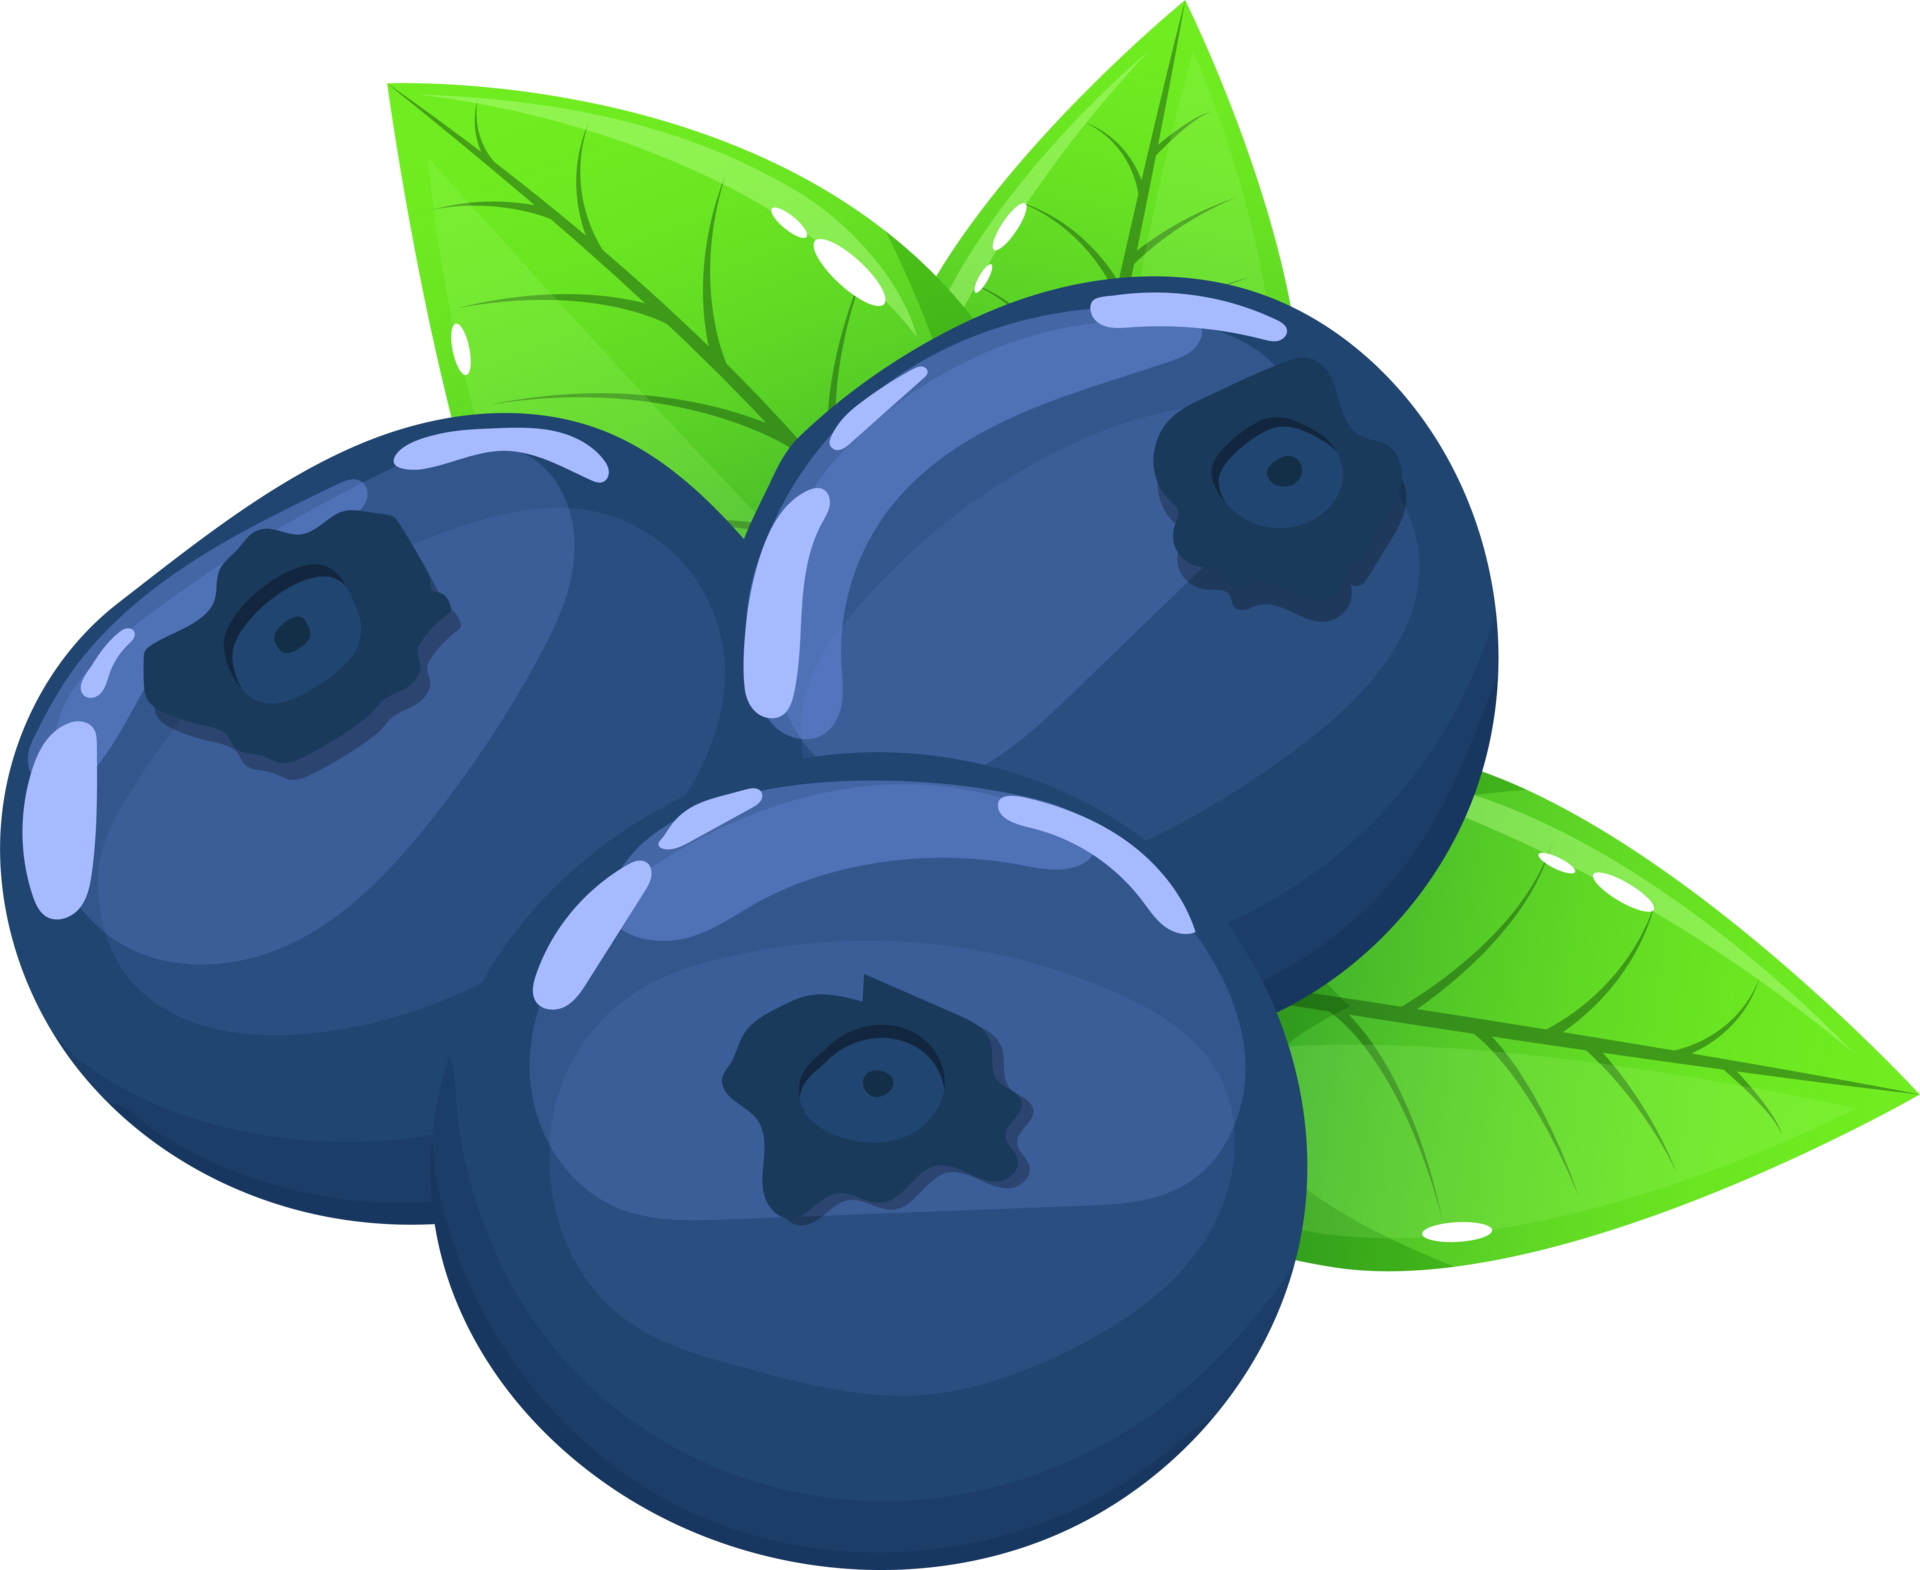 Blueberry Pngs For Free Download